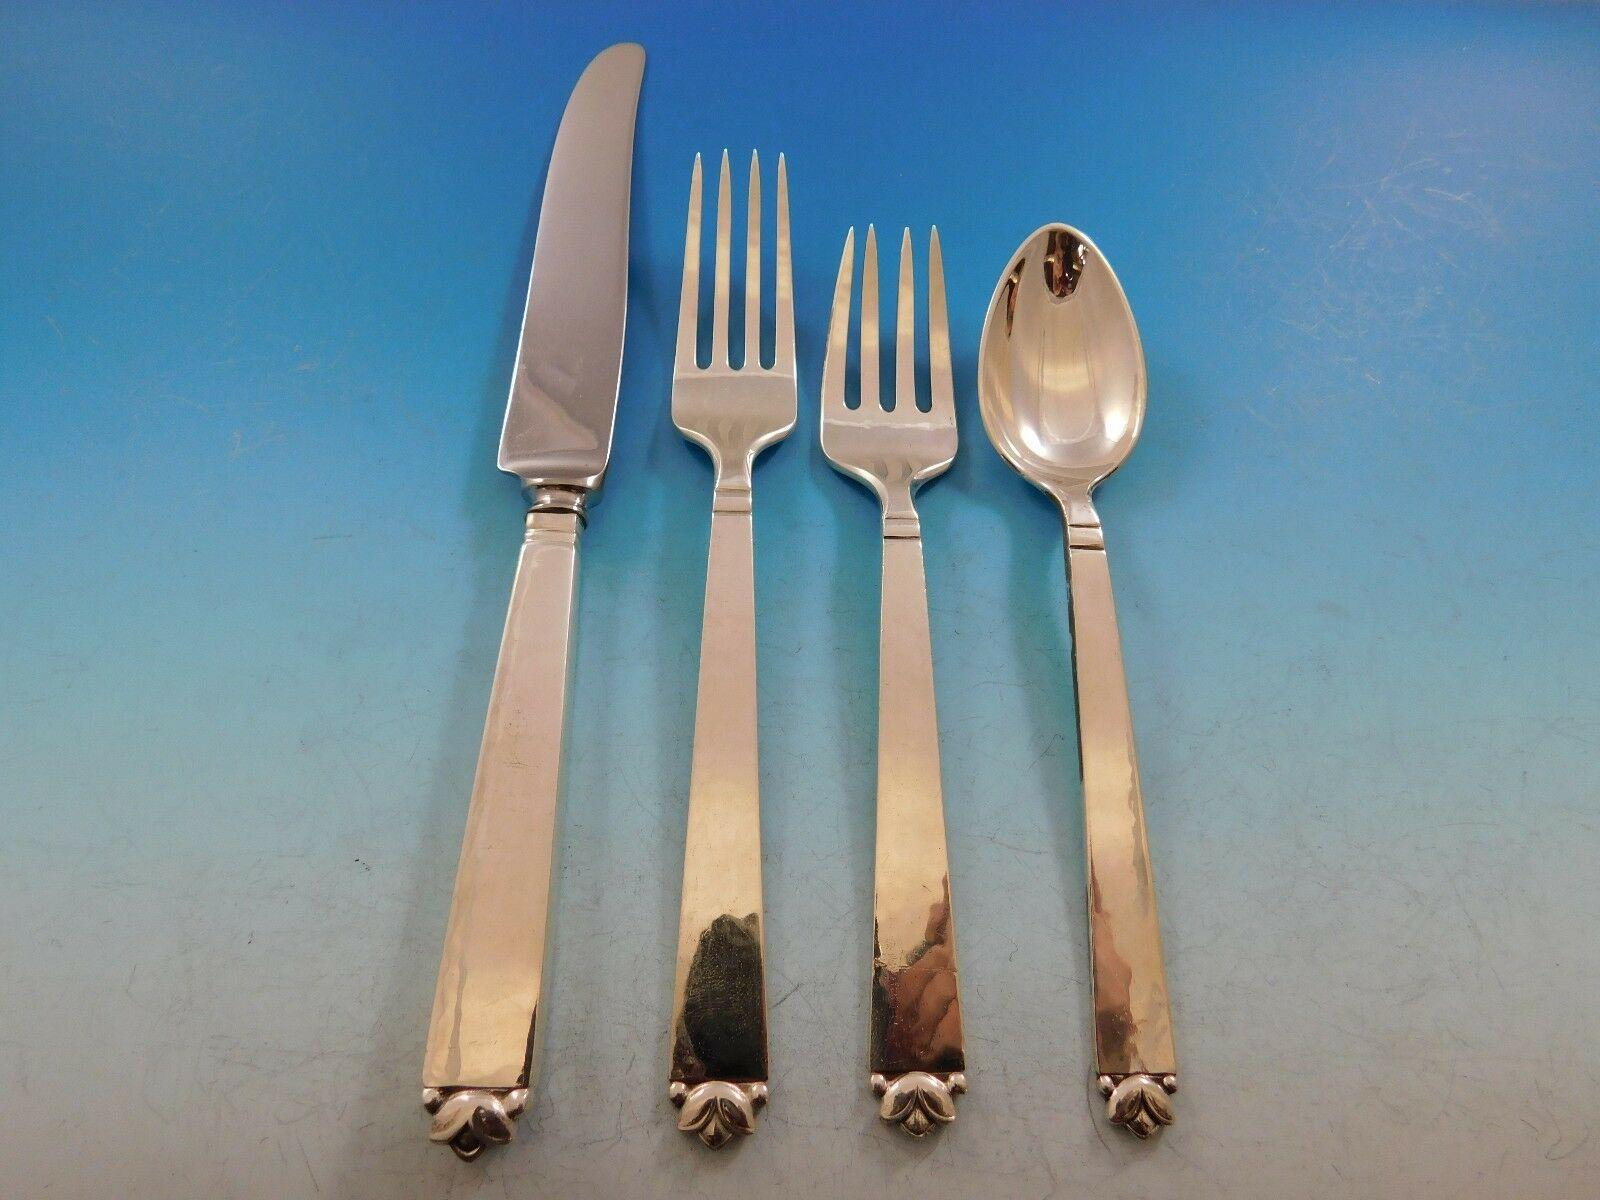 Oak leaf by Old Newbury crafters sterling silver flatware set, 59 pieces. This set is handmade and features the stamp of high-end Buffalo, NY retailer 